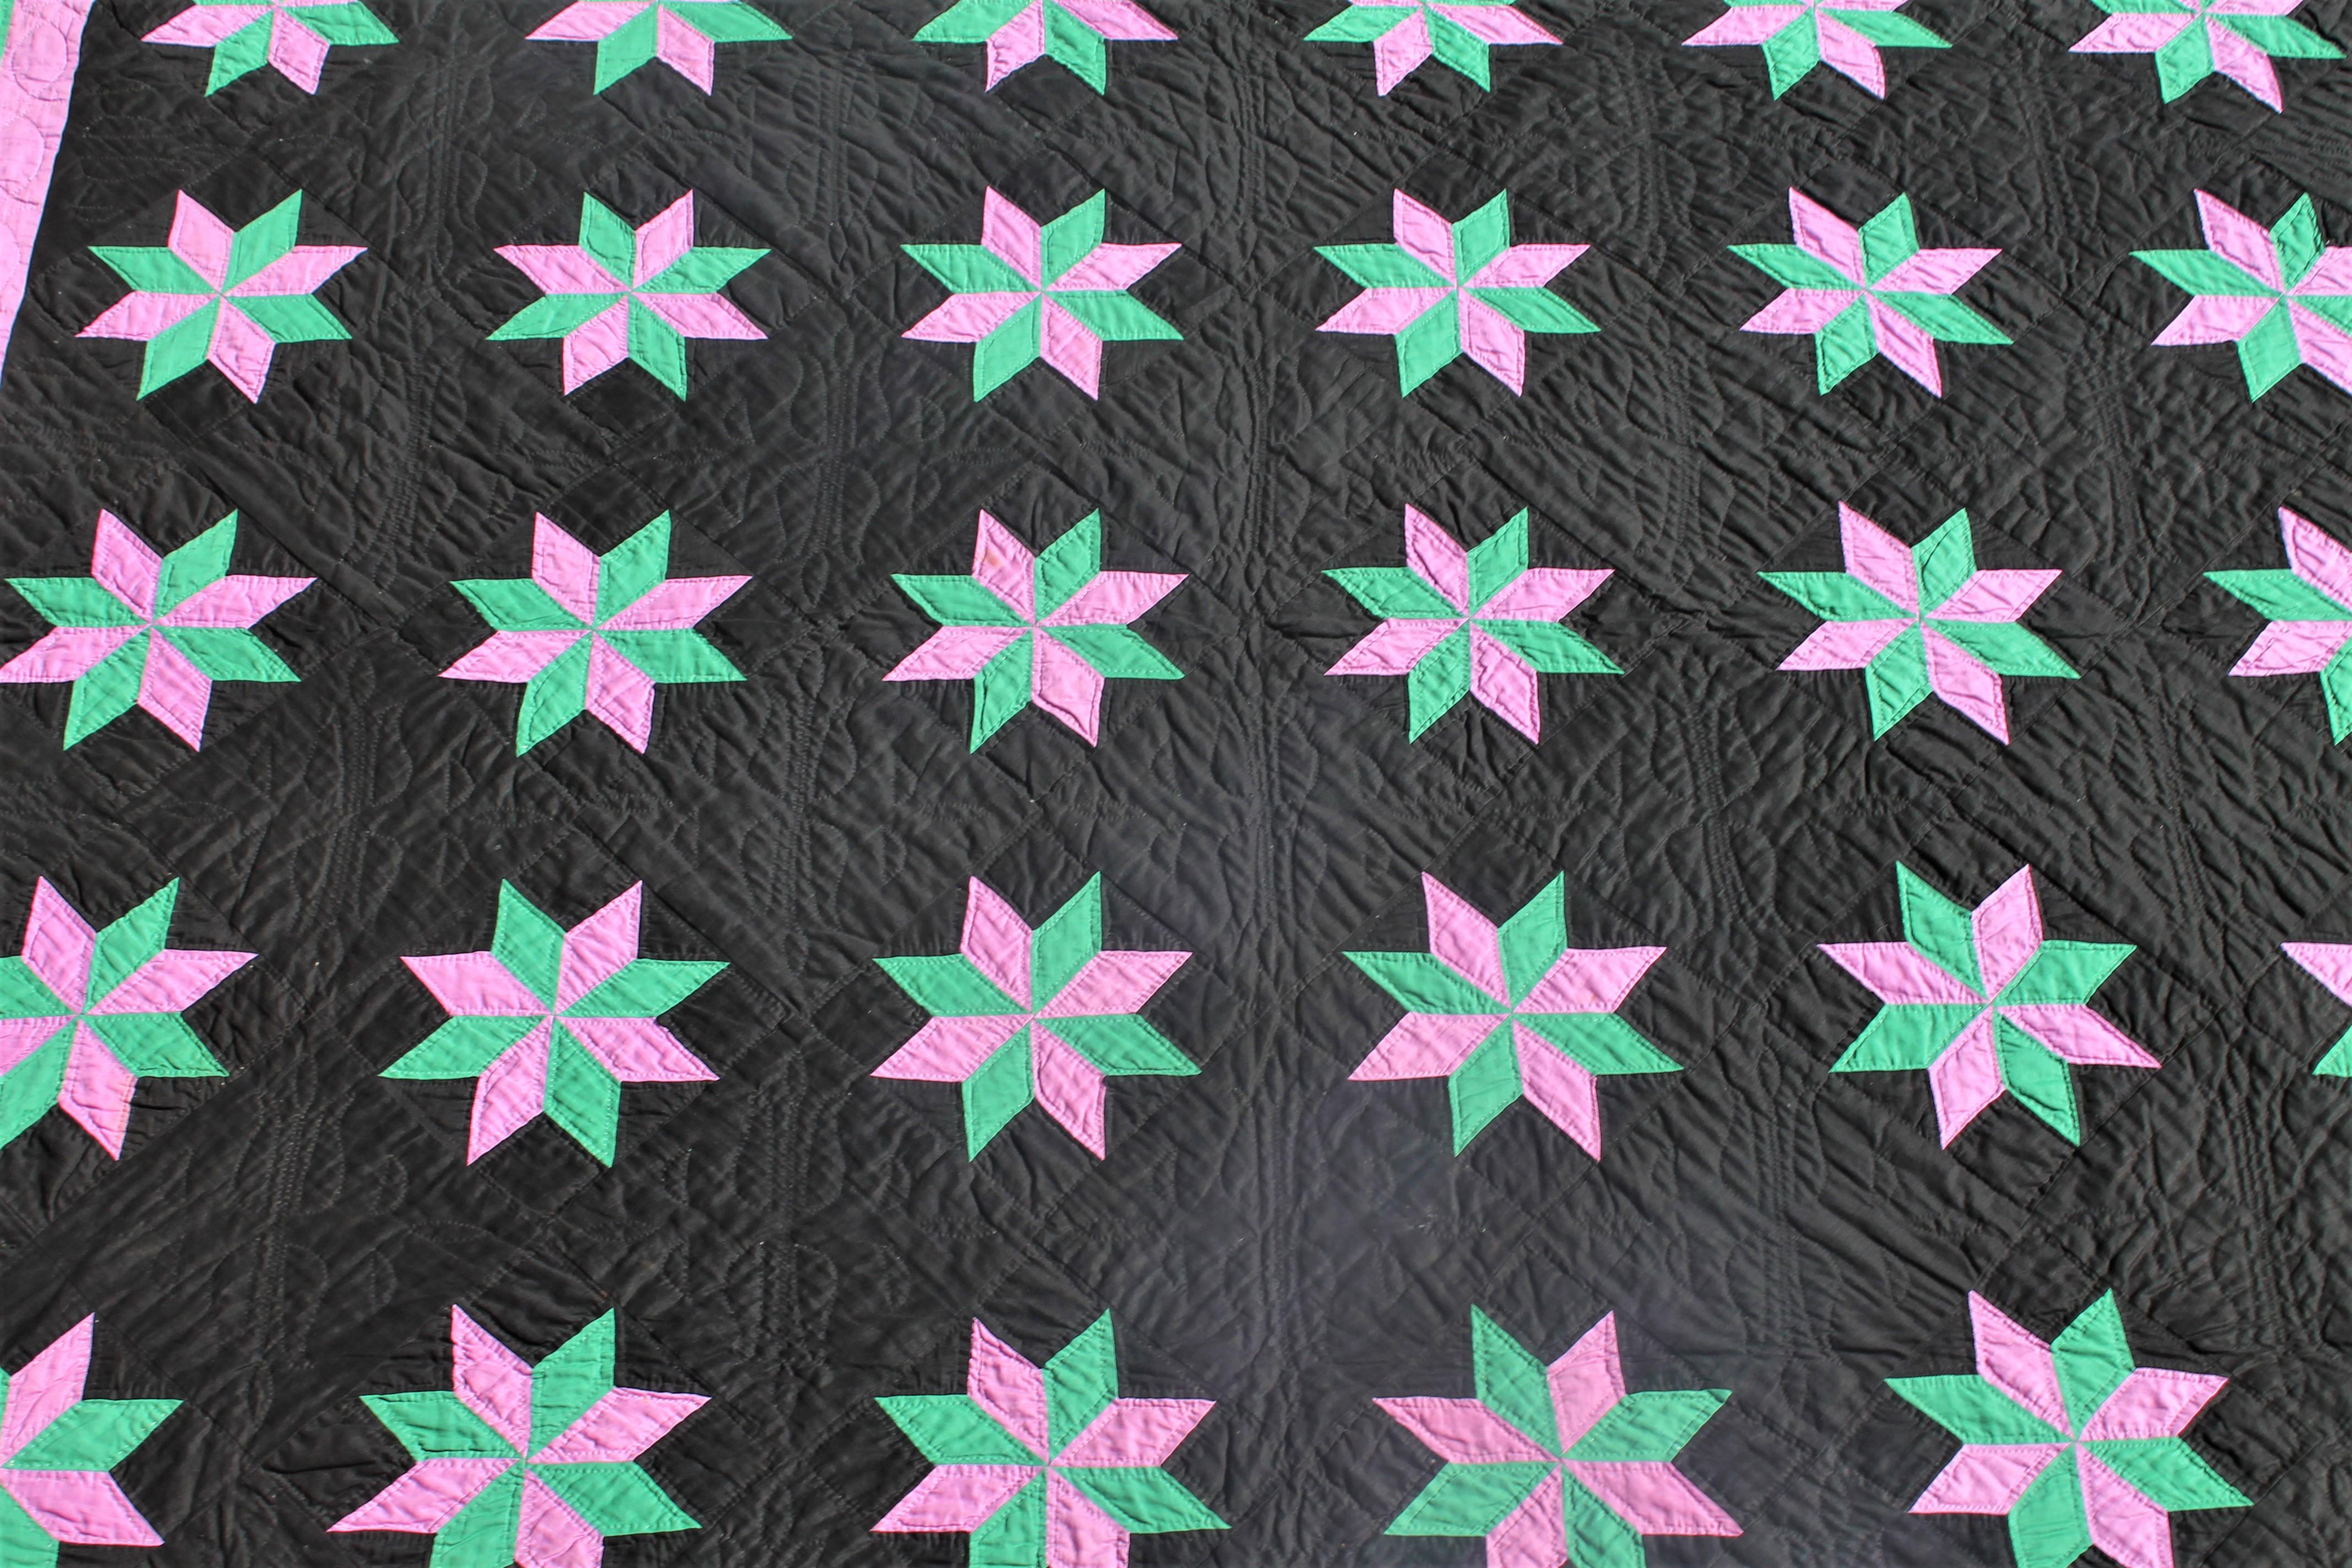 Amish quilt Holmes County Ohio eight point stars on a black ground. The black ground is a polished cotton and eight point stars and a fantastic double inner border. 1930s in pristine condition and fantastic piece work and fine quilting. This is from